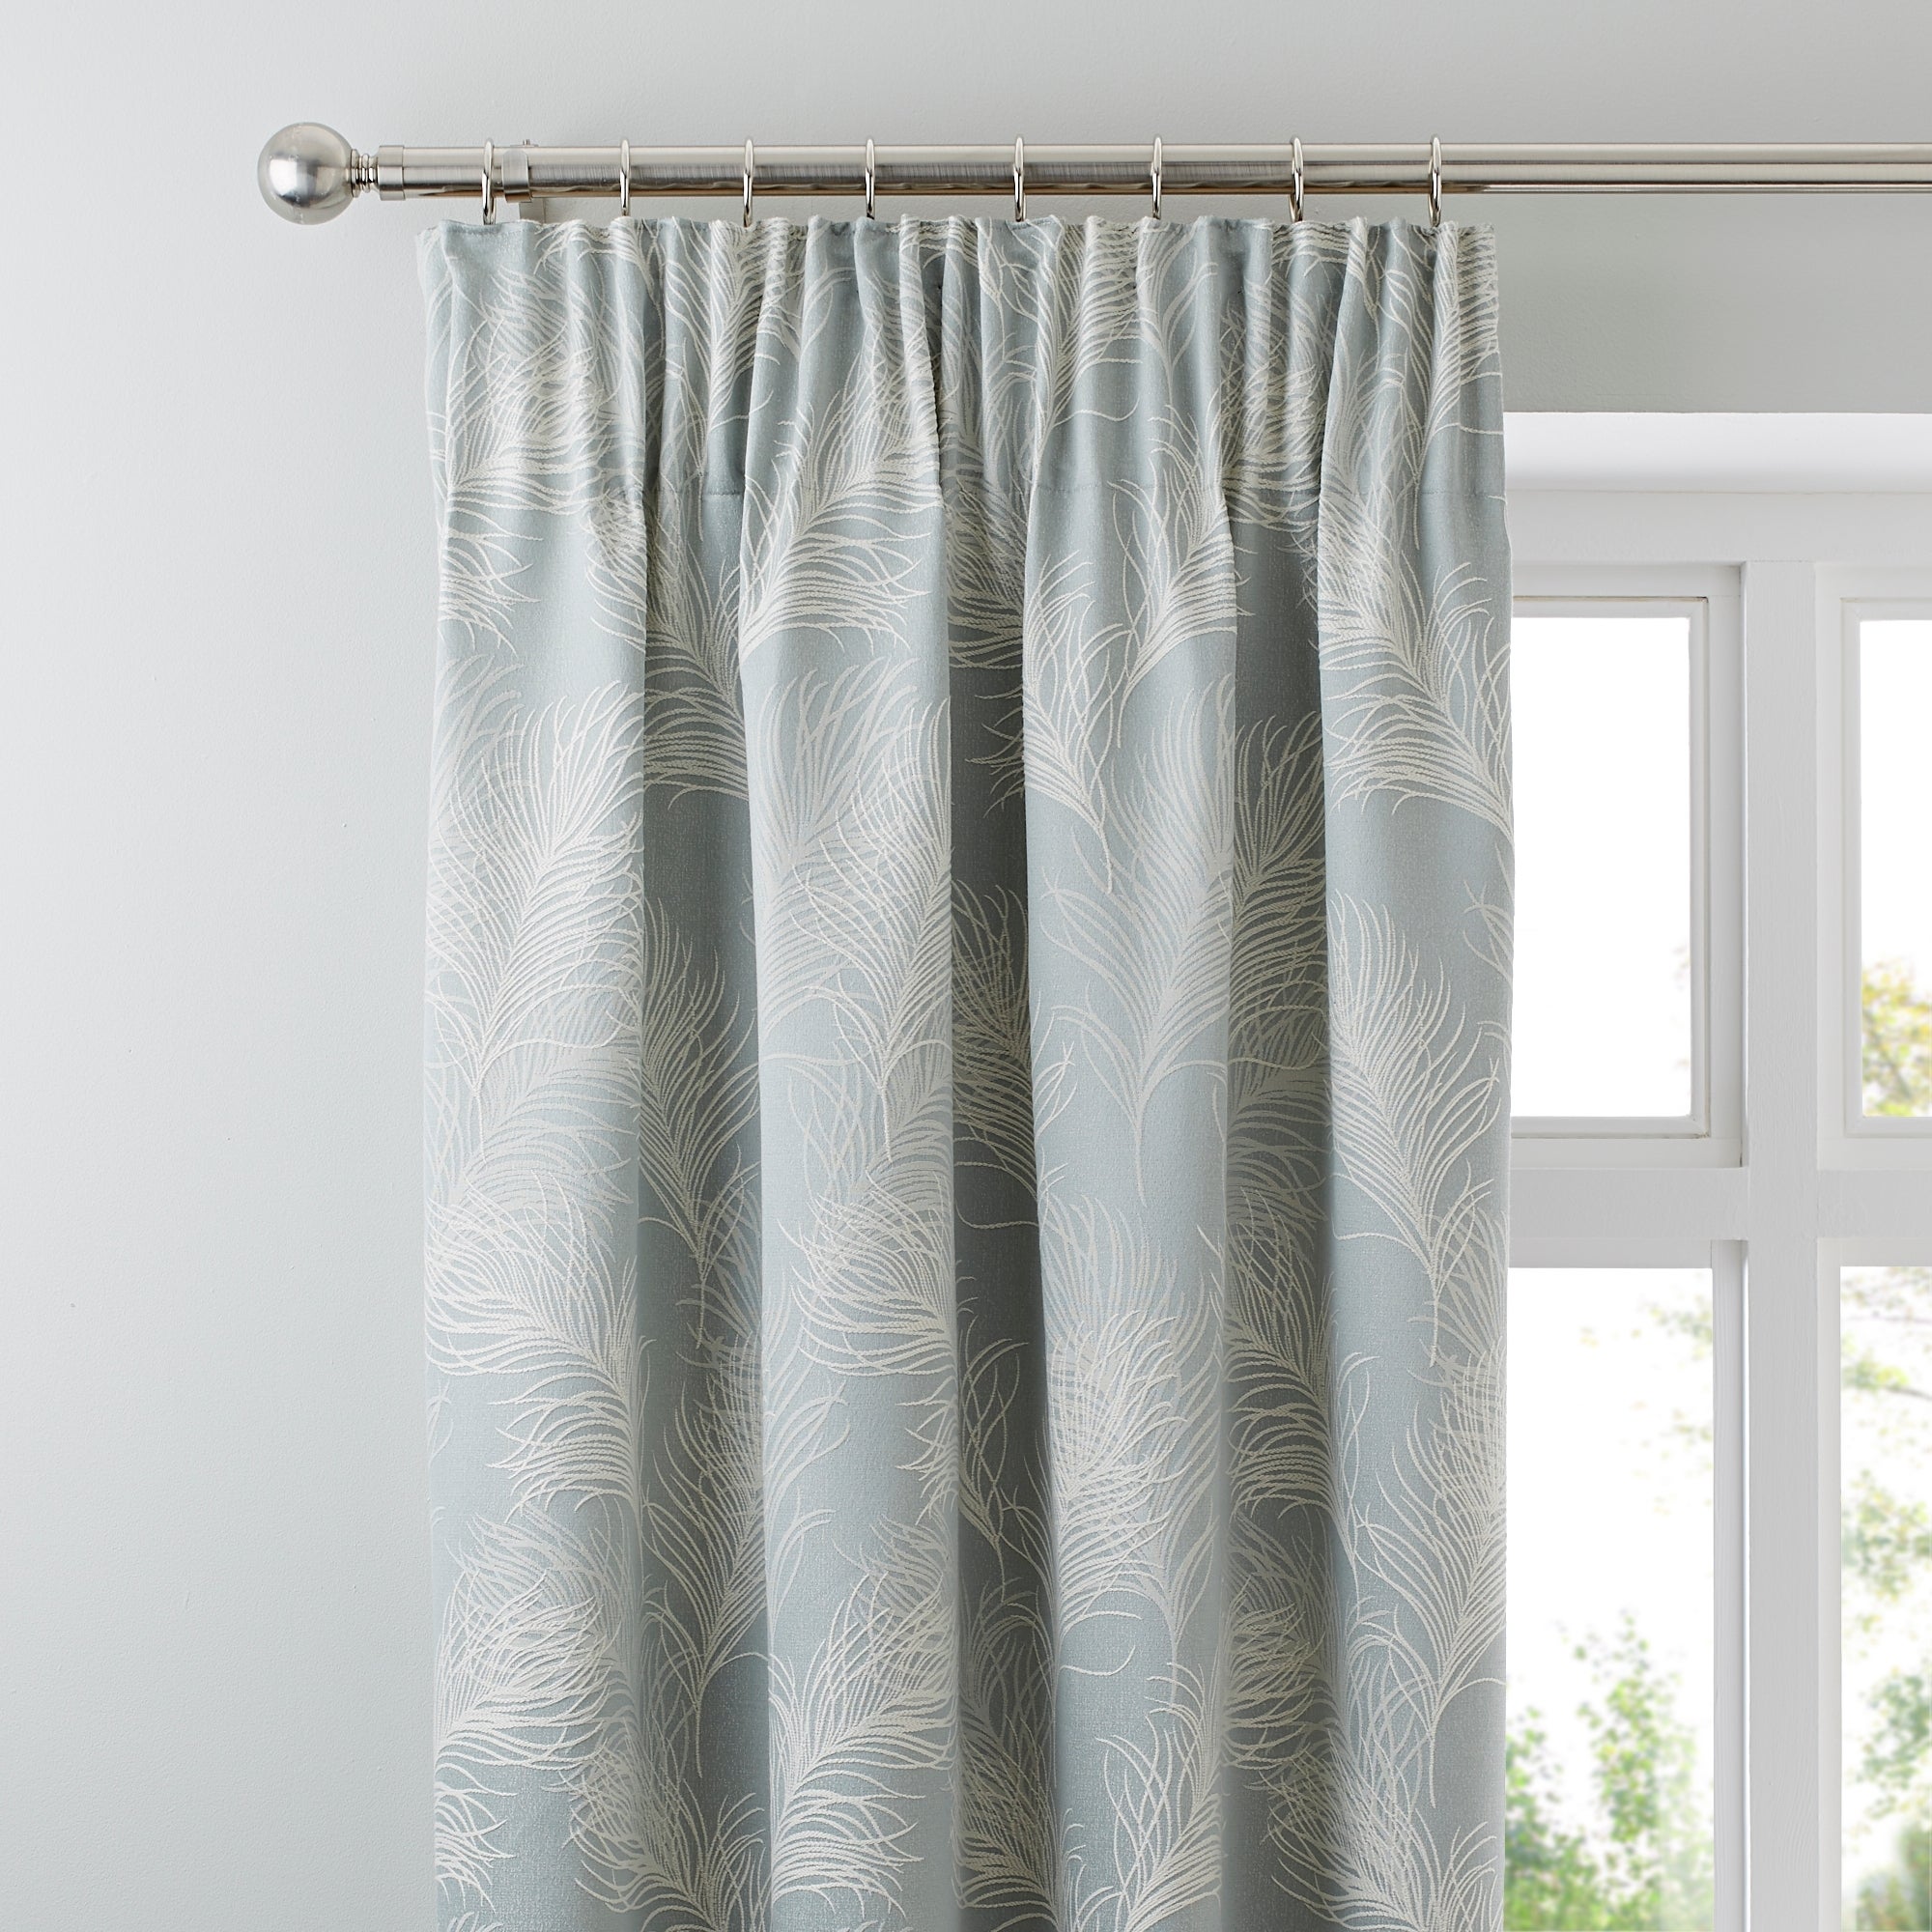 All Ready Made Curtains | Dunelm | Page 4